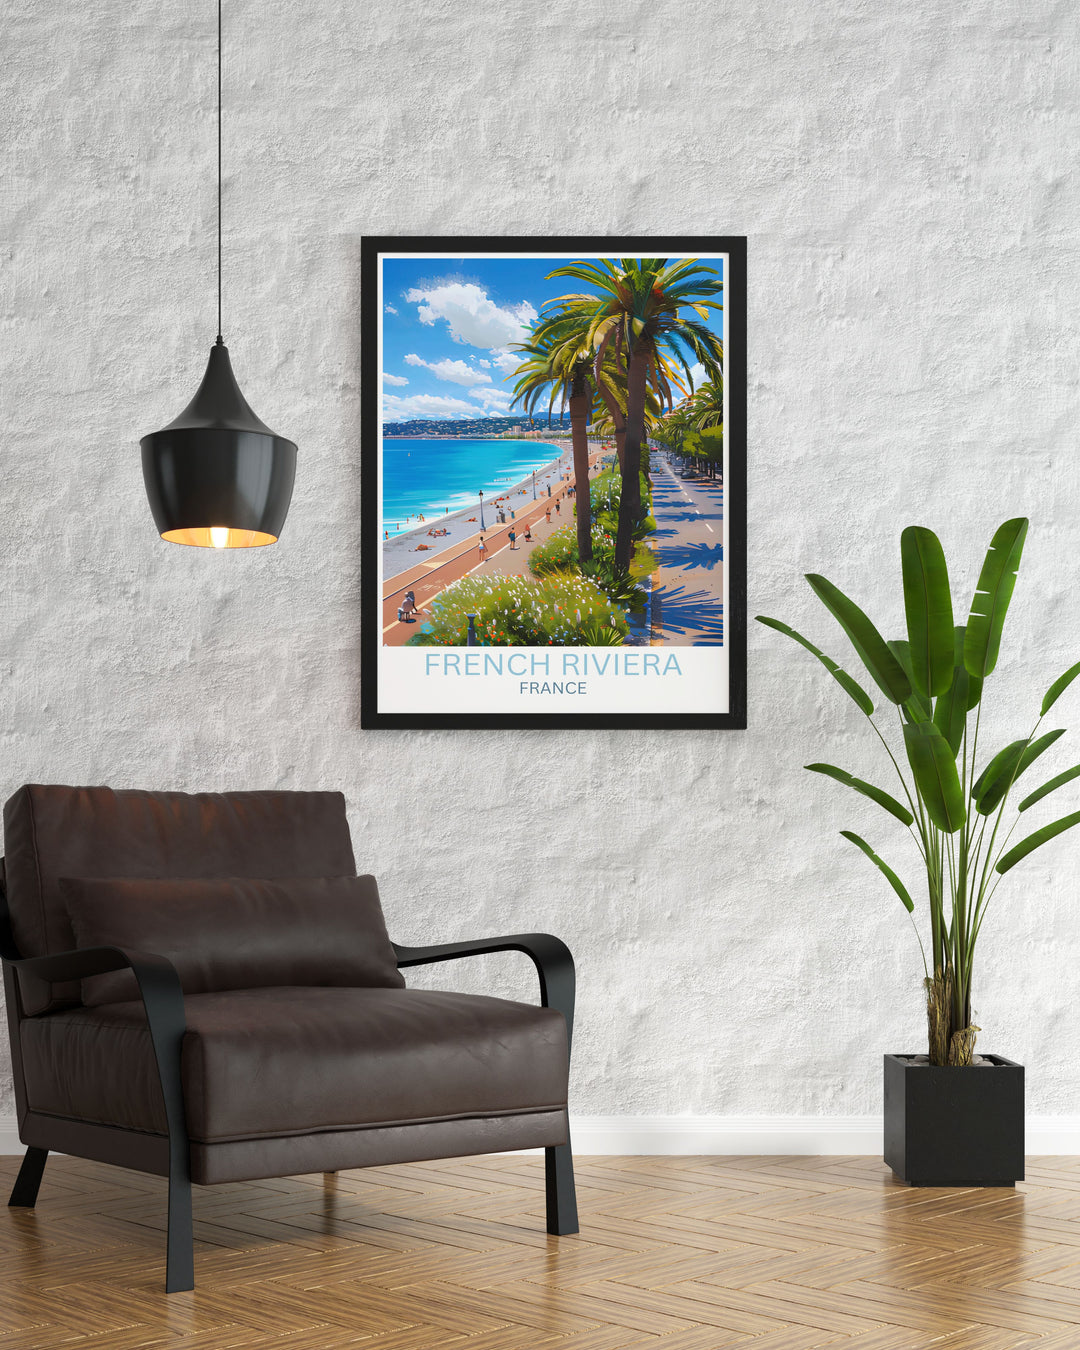 Custom print of the French Riviera tailored to client preferences, showcasing the elegant coastline and vibrant street scenes